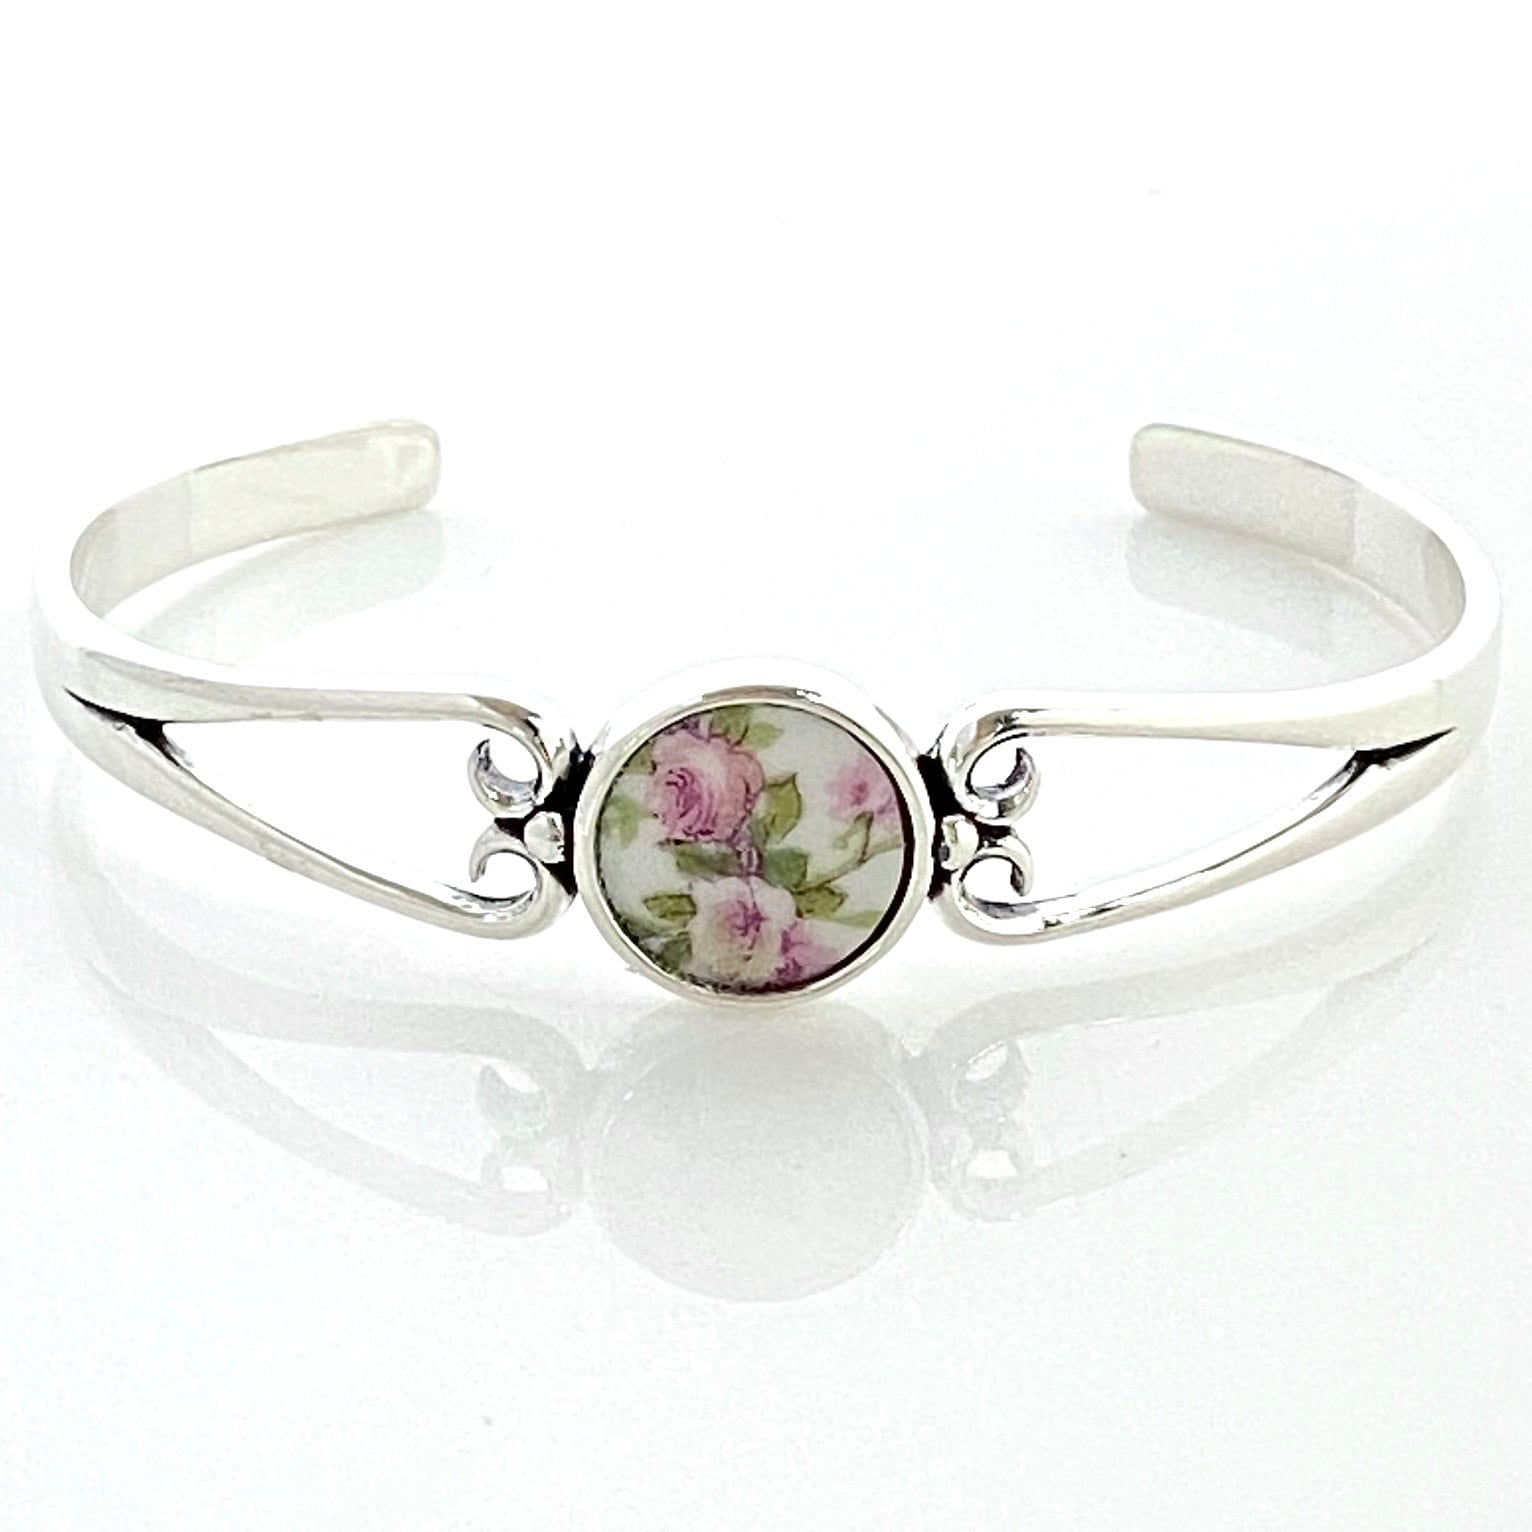 Unique 25th Wedding Anniversary Gift for Wife, French Limoges Sterling Silver Anniversary Bracelet